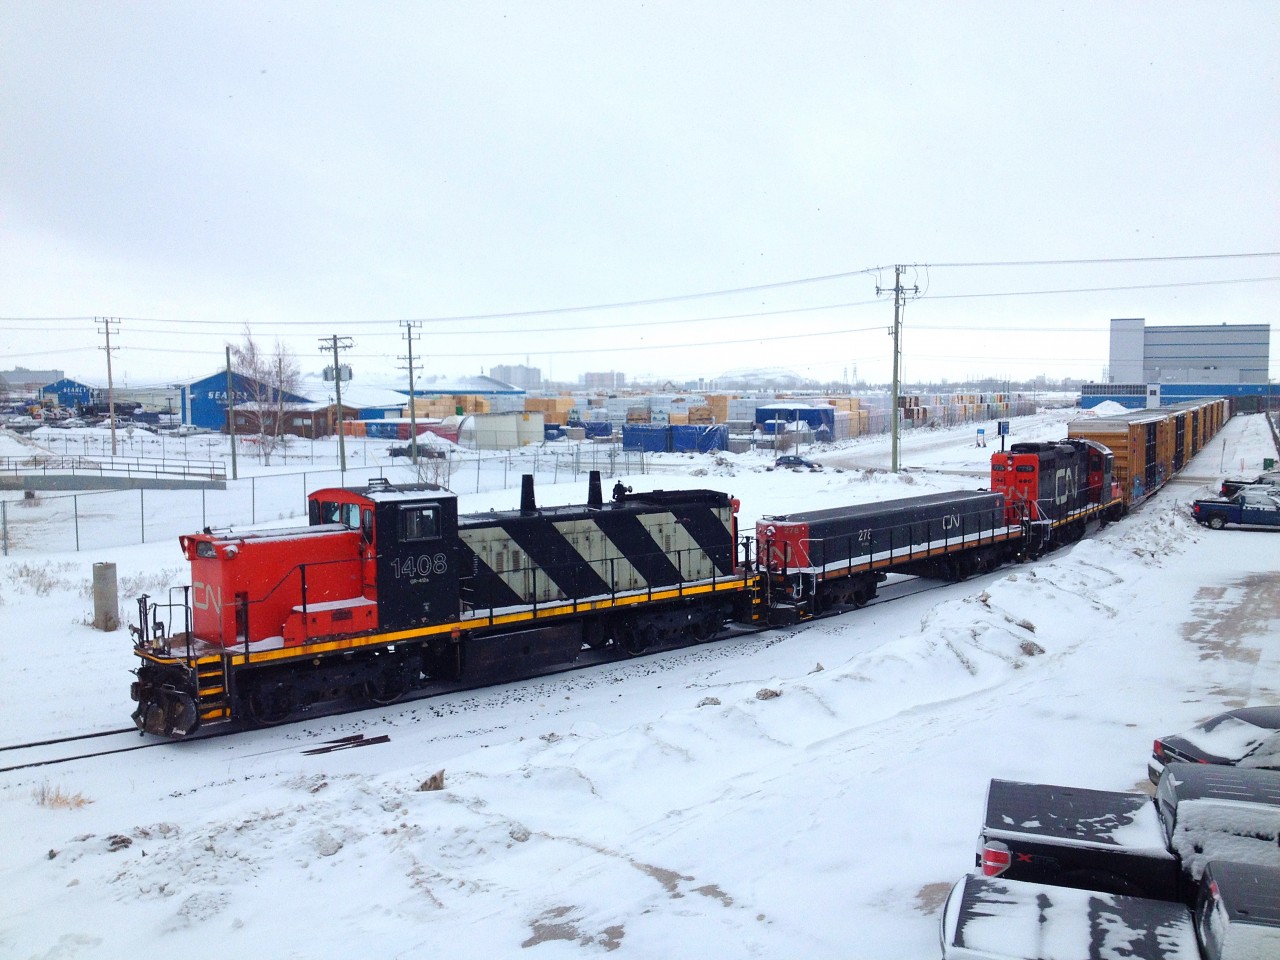 CN 1408, 278, and 7239 bring a string of cars across Chevrier Blvd in the Fort Garry Industrial, as they start to round a curve. They are currently carrying 7 boxcars and 6 centerbeam flatbeds. CN 1408 is a rare GMD1, built in 1960.